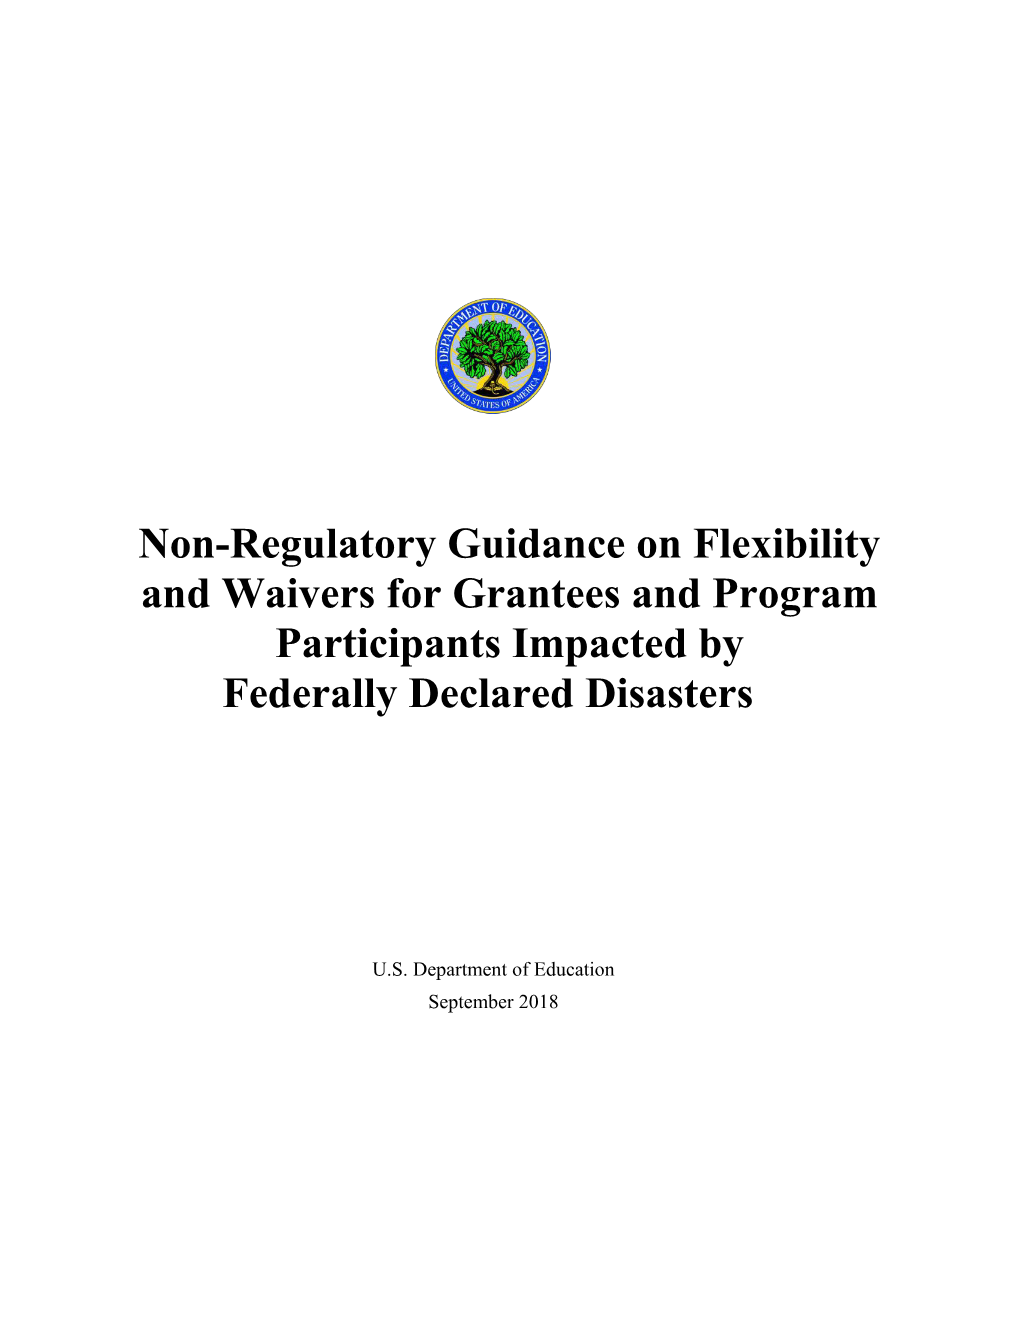 Non-Regulatory Guidance on Flexibility and Waivers for Grantees and Program Participants